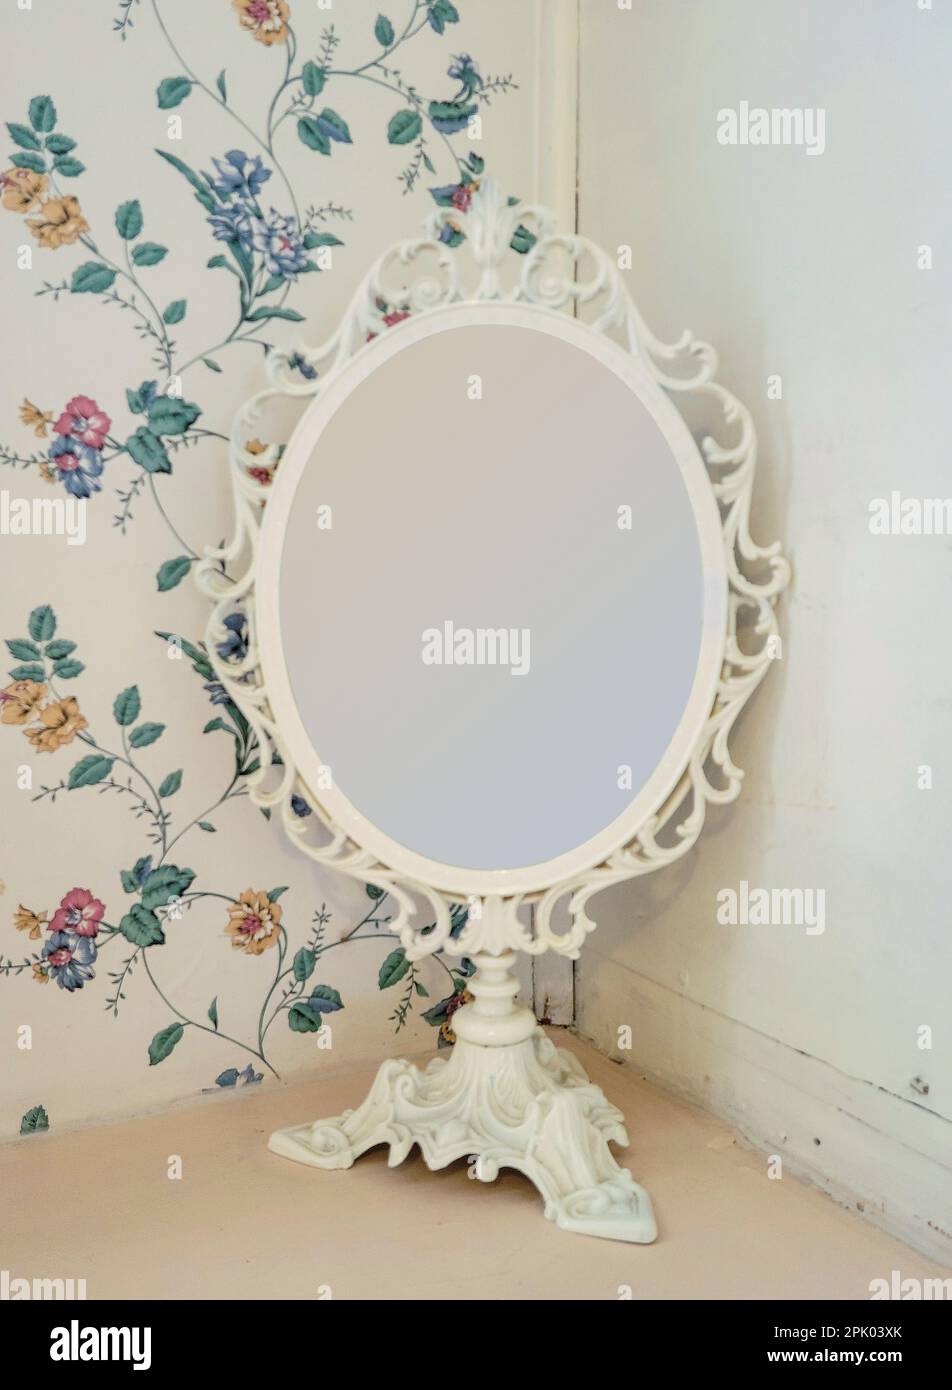 Old-fashioned ivory ornate mirror on a pedestal with retro floral wallpaper background Stock Photo